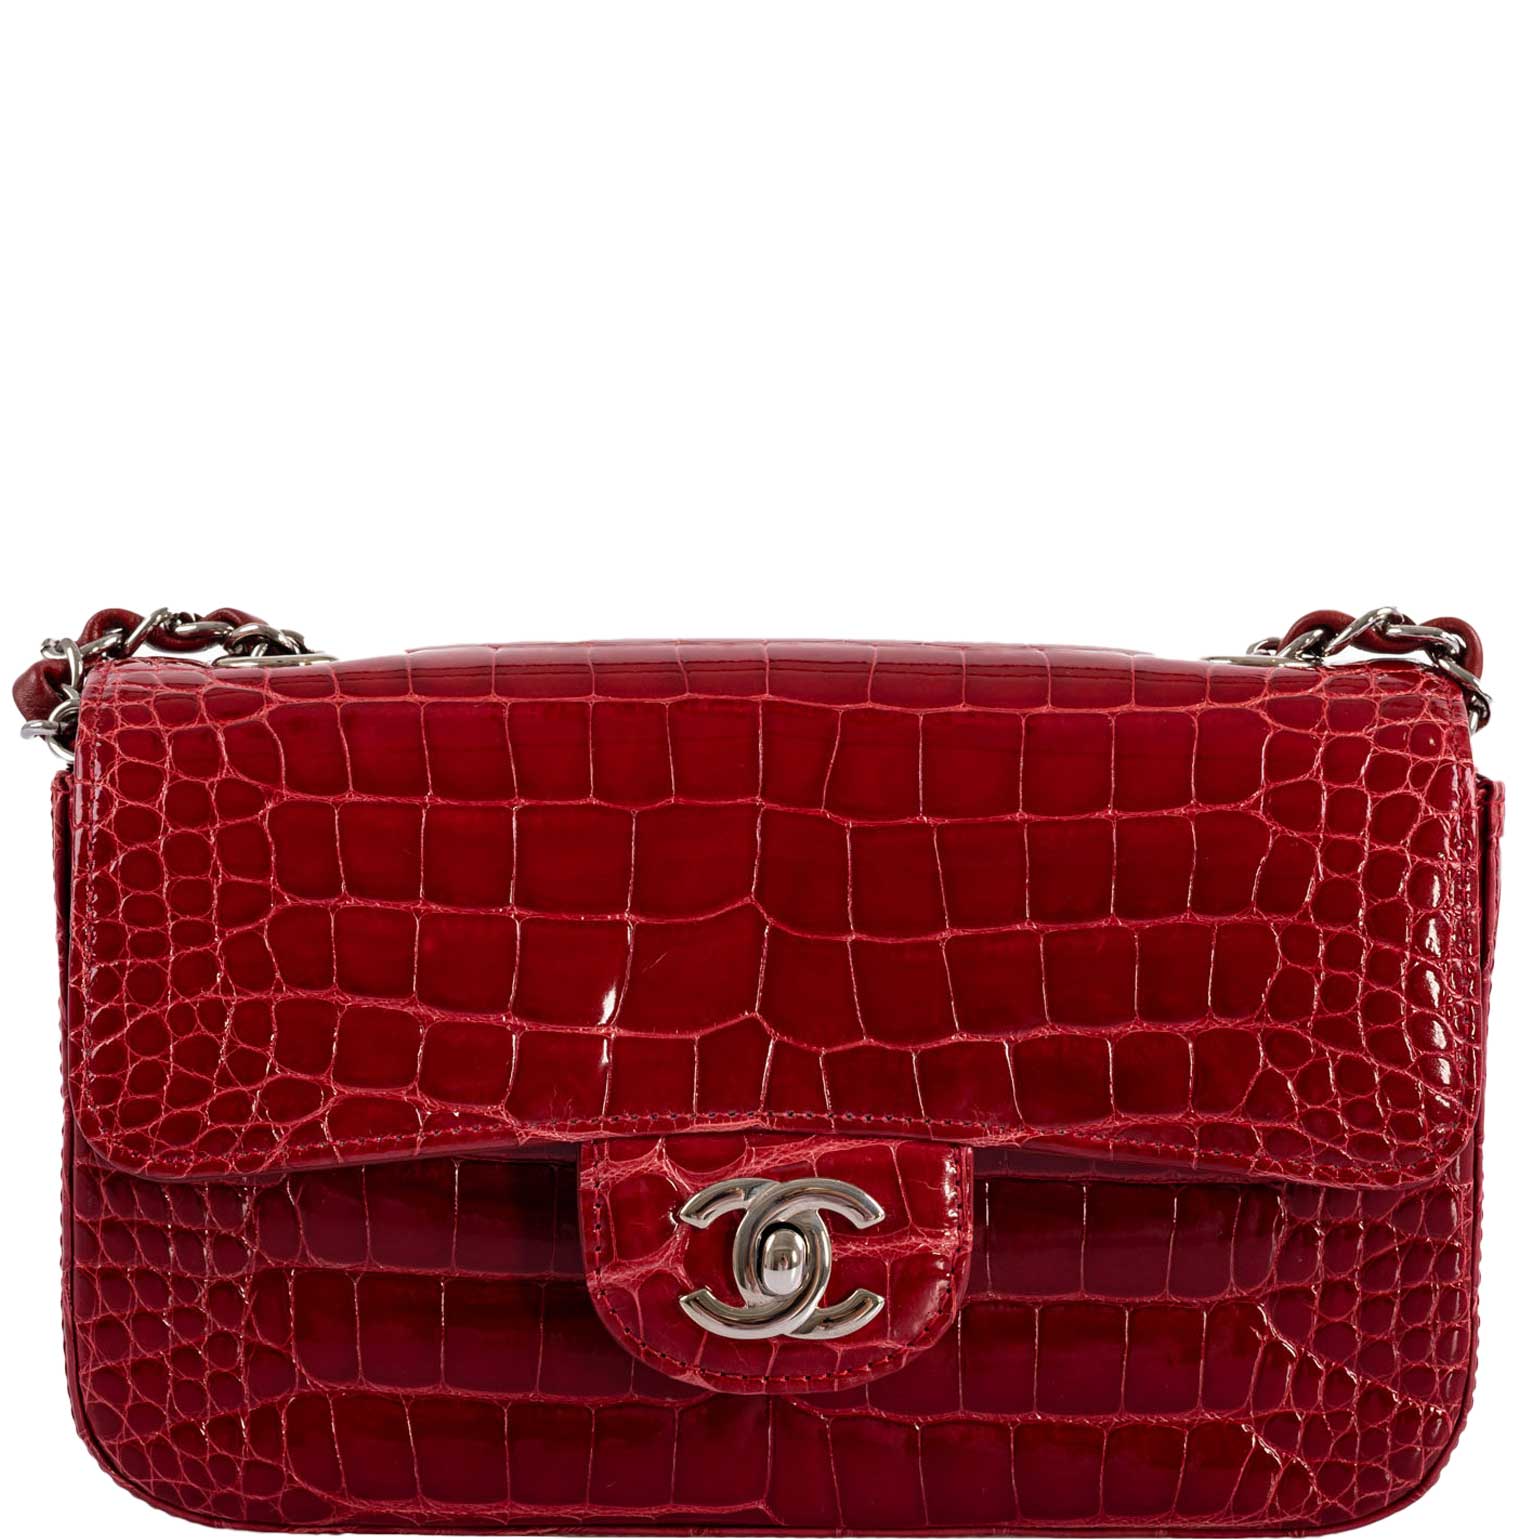 CHANEL SMALL ALLIGATOR SKIN CLASSIC DARK RED FLAP SHOULDER BAG. NEW &  AUTHENTIC